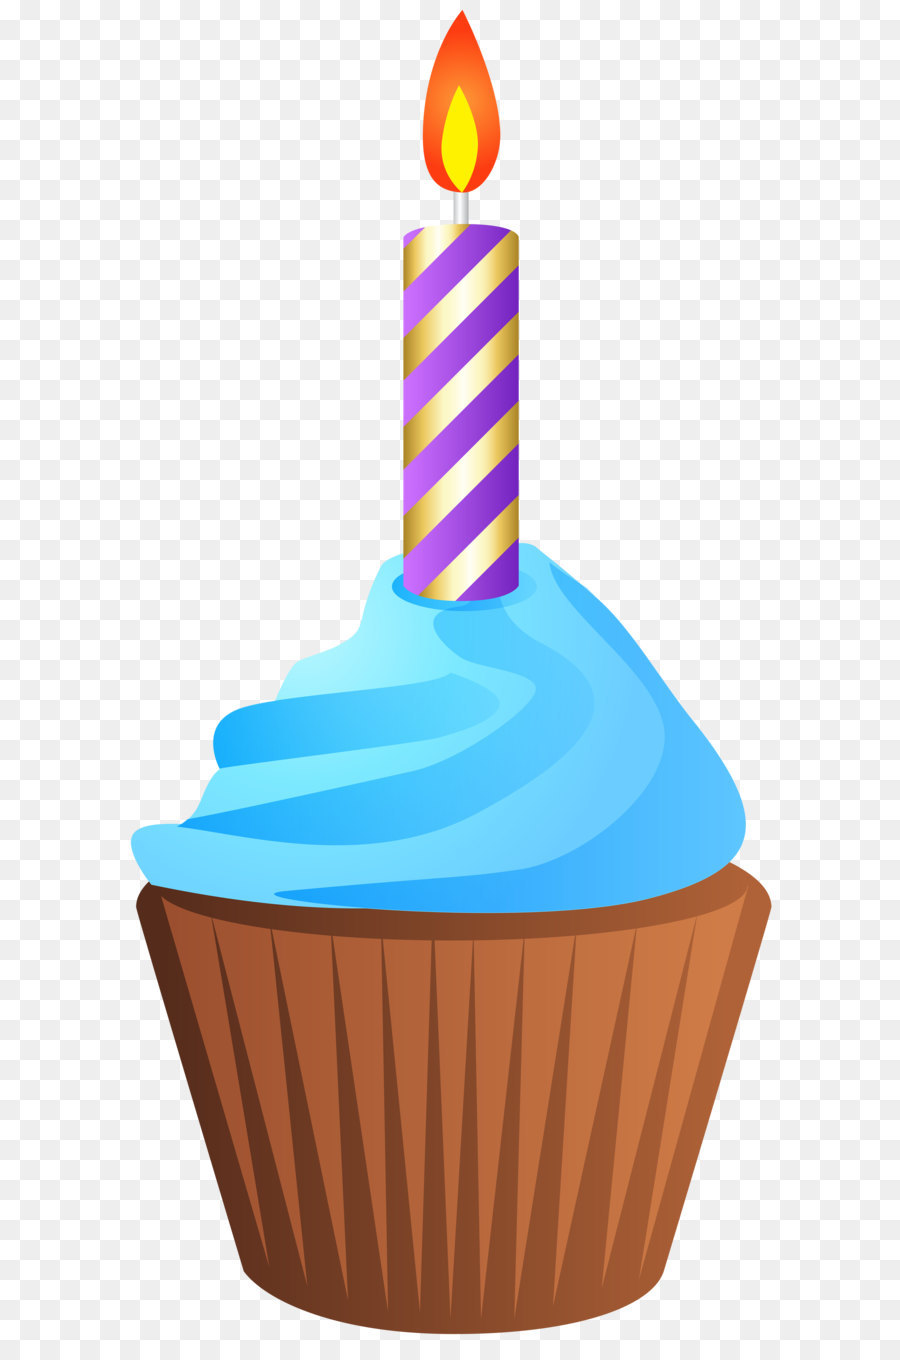 Muffin Birthday cake Clip art - Birthday Muffin with Candle Transparent PNG Clip Art Image png download - 3869*8000 - Free Transparent Birthday Cake png Download.